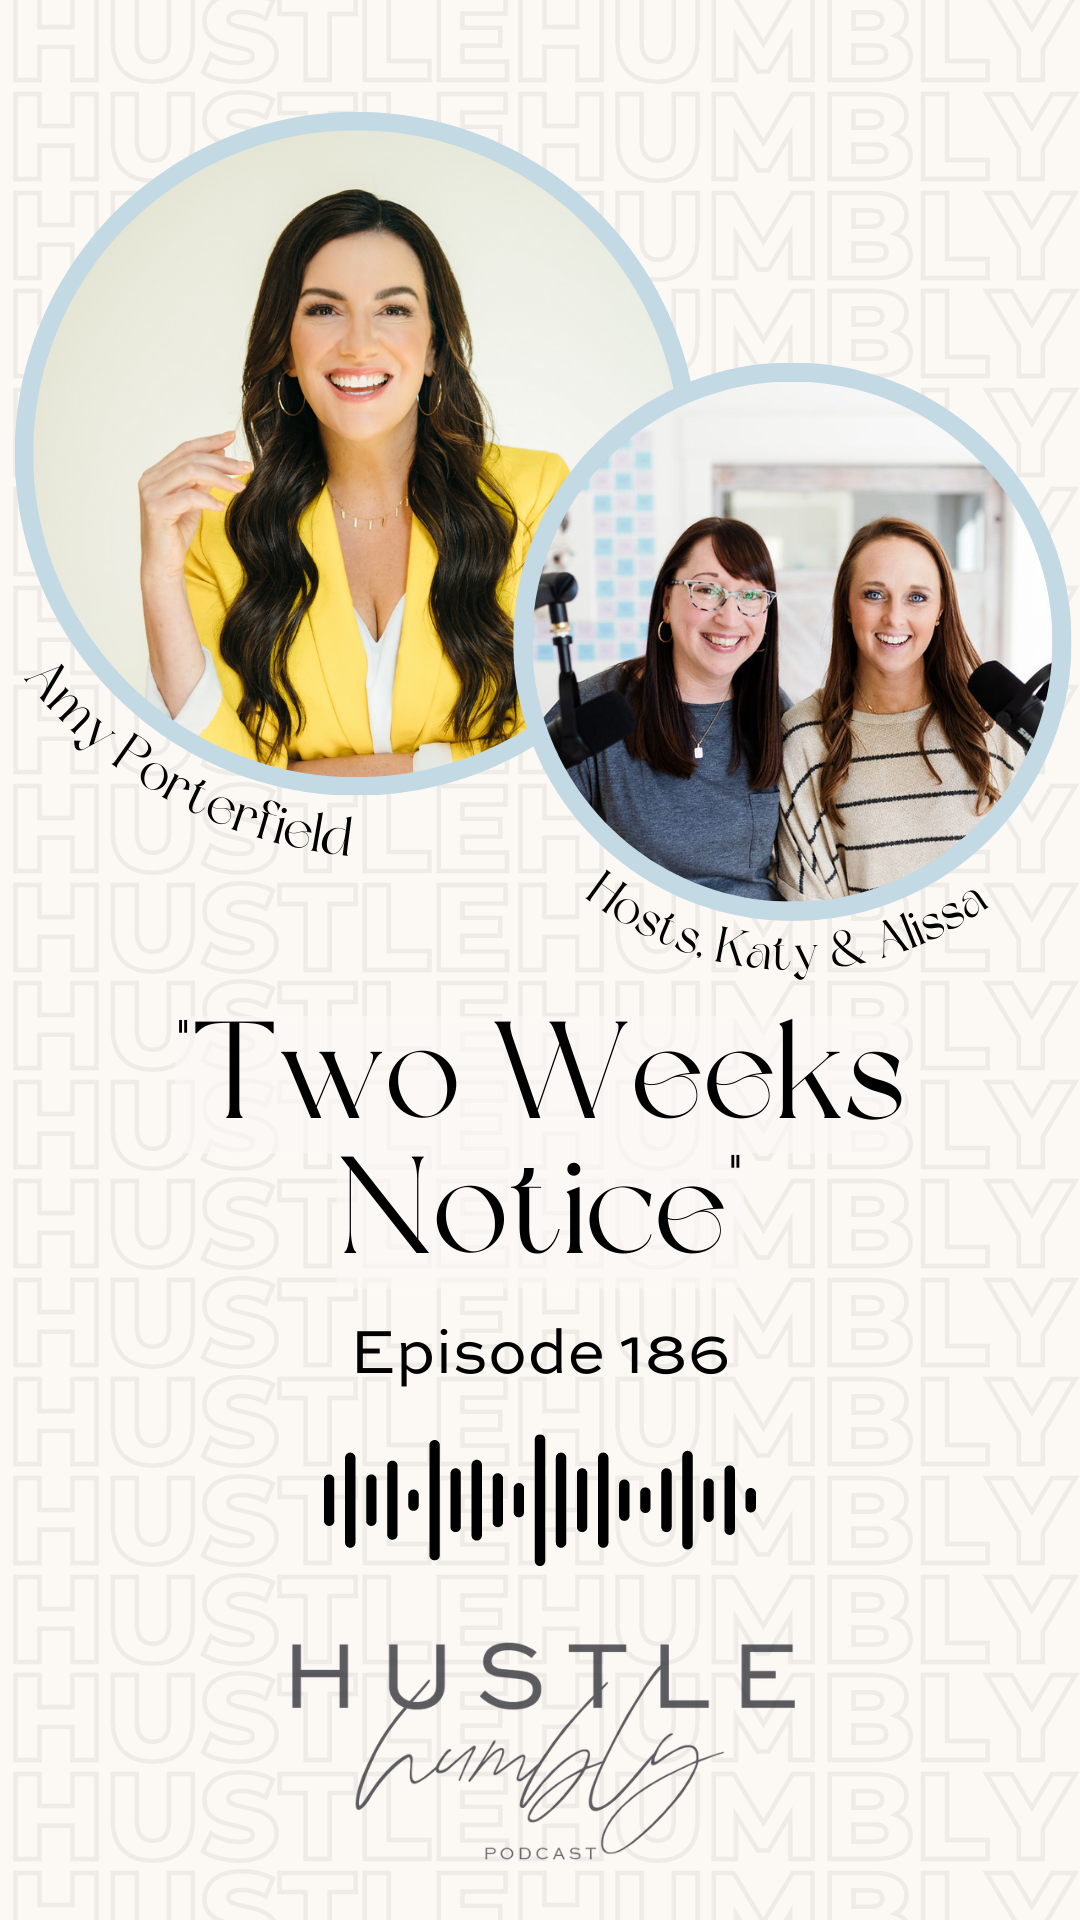 Hustle Humbly Podcast  Episode 186: Two Weeks Notice with Amy Porterfield